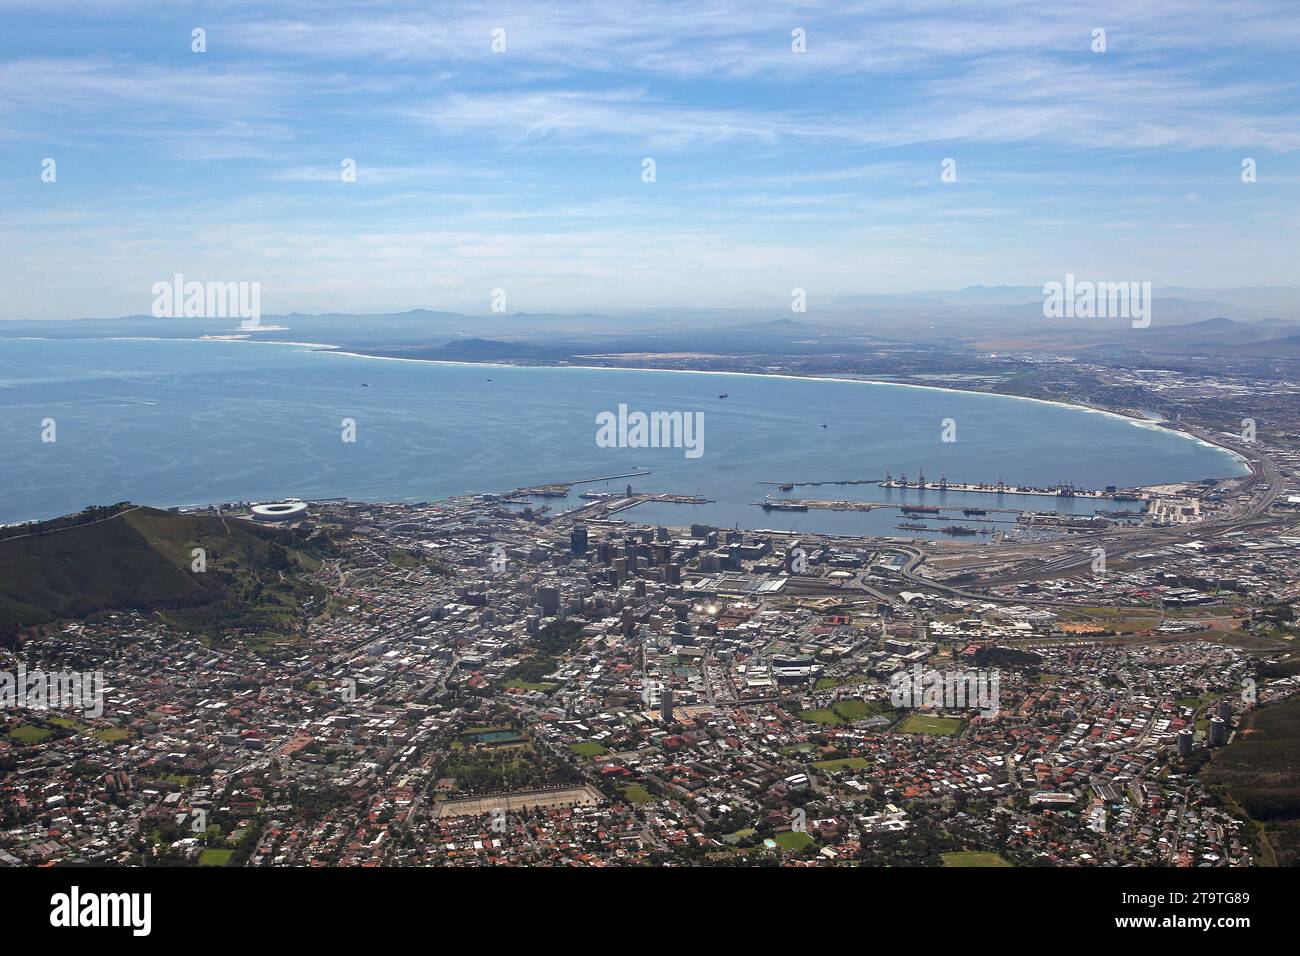 The City of Cape Town seen from the top of Table Mountain. Stock Photo